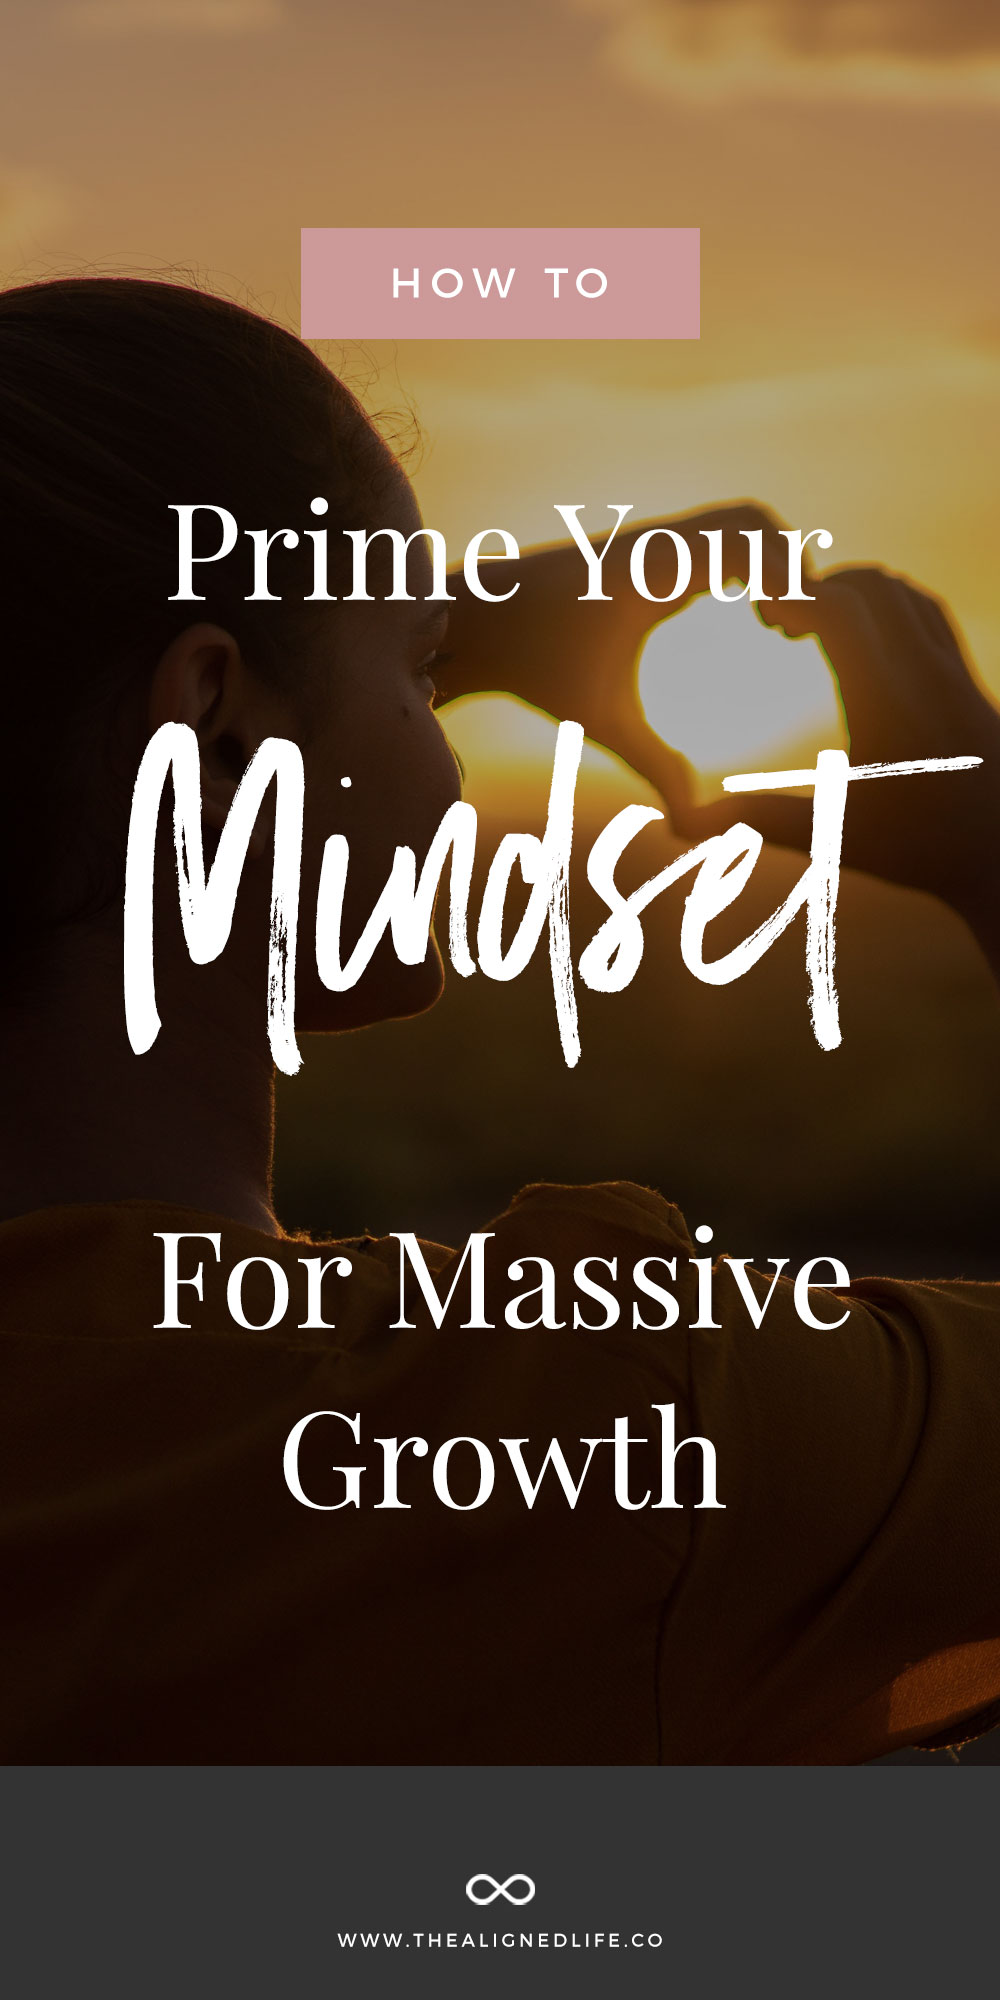 How To Prime Your Mindset For Massive Growth